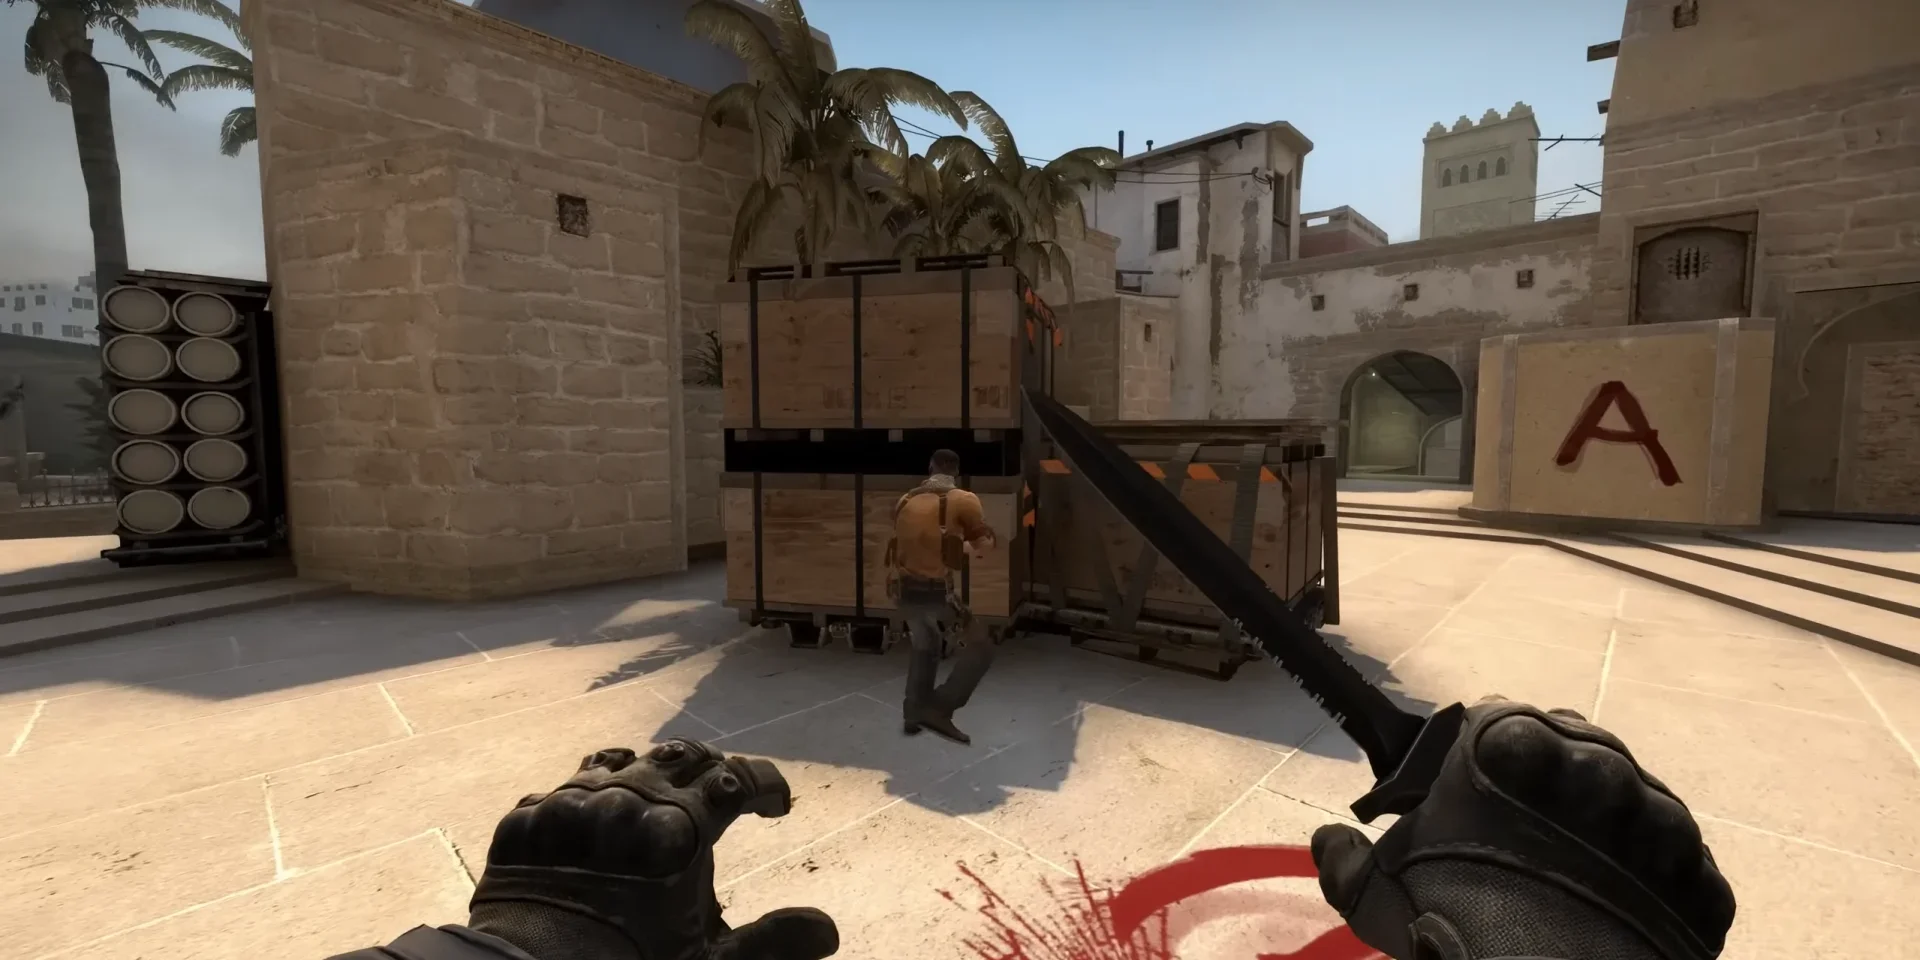 This CS2 knife bug is so fire that Valve should probably just make it a thing